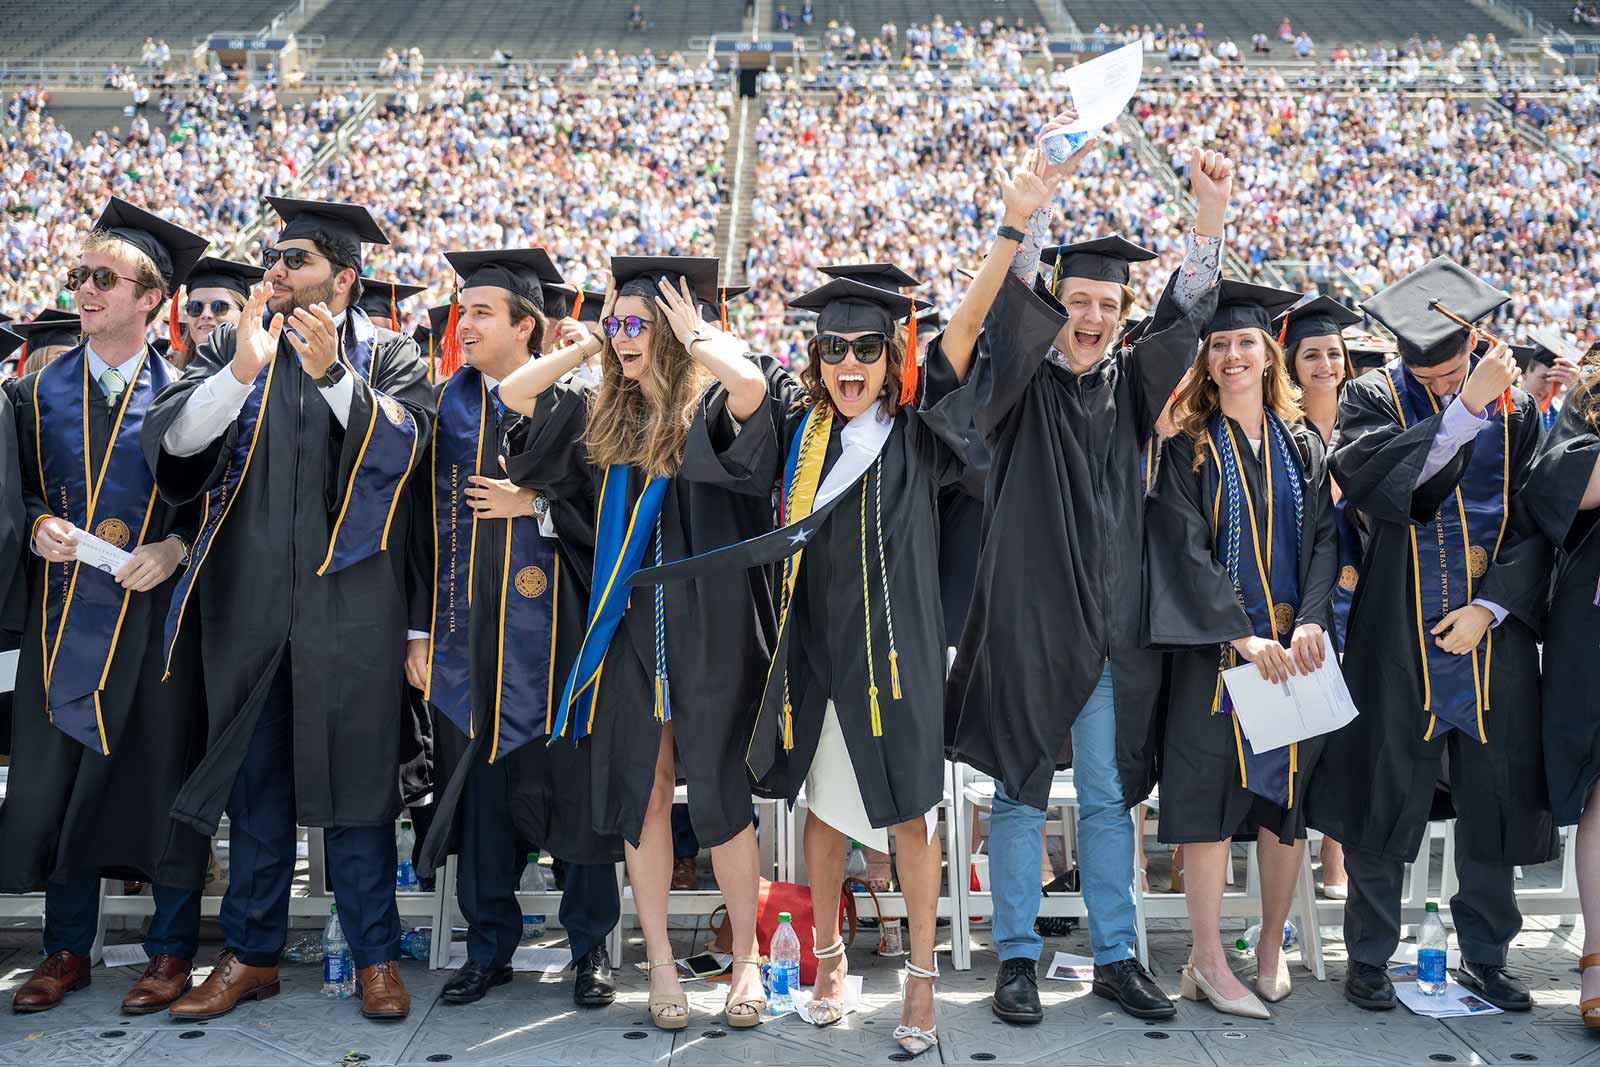 Graduates of the class of 2020 celebrate at the close of the 2020 Commencement ceremony in Notre Dame Stadium.